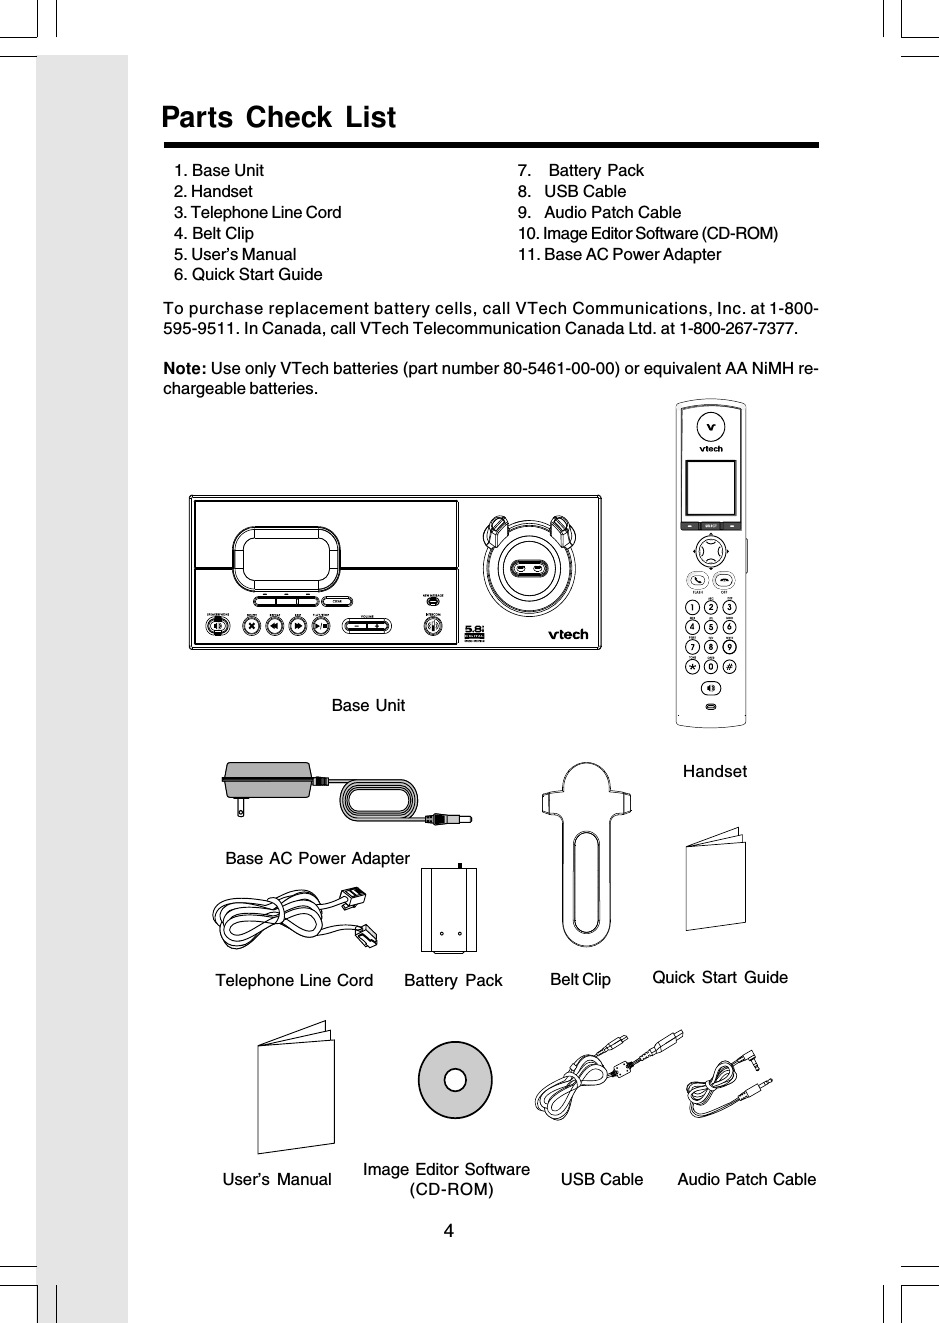 4Parts Check List1. Base Unit2. Handset3. Telephone Line Cord4. Belt Clip5. User’s Manual6. Quick Start Guide7.   Battery Pack8.   USB Cable9.   Audio Patch Cable10. Image Editor Software (CD-ROM)11. Base AC Power AdapterTo purchase replacement battery cells, call VTech Communications, Inc. at 1-800-595-9511. In Canada, call VTech Telecommunication Canada Ltd. at 1-800-267-7377.Note: Use only VTech batteries (part number 80-5461-00-00) or equivalent AA NiMH re-chargeable batteries.Base UnitHandsetTelephone Line Cord Belt ClipUser’s ManualQuick Start GuideBattery PackUSB Cable Audio Patch CableImage Editor Software(CD-ROM)Base AC Power Adapter